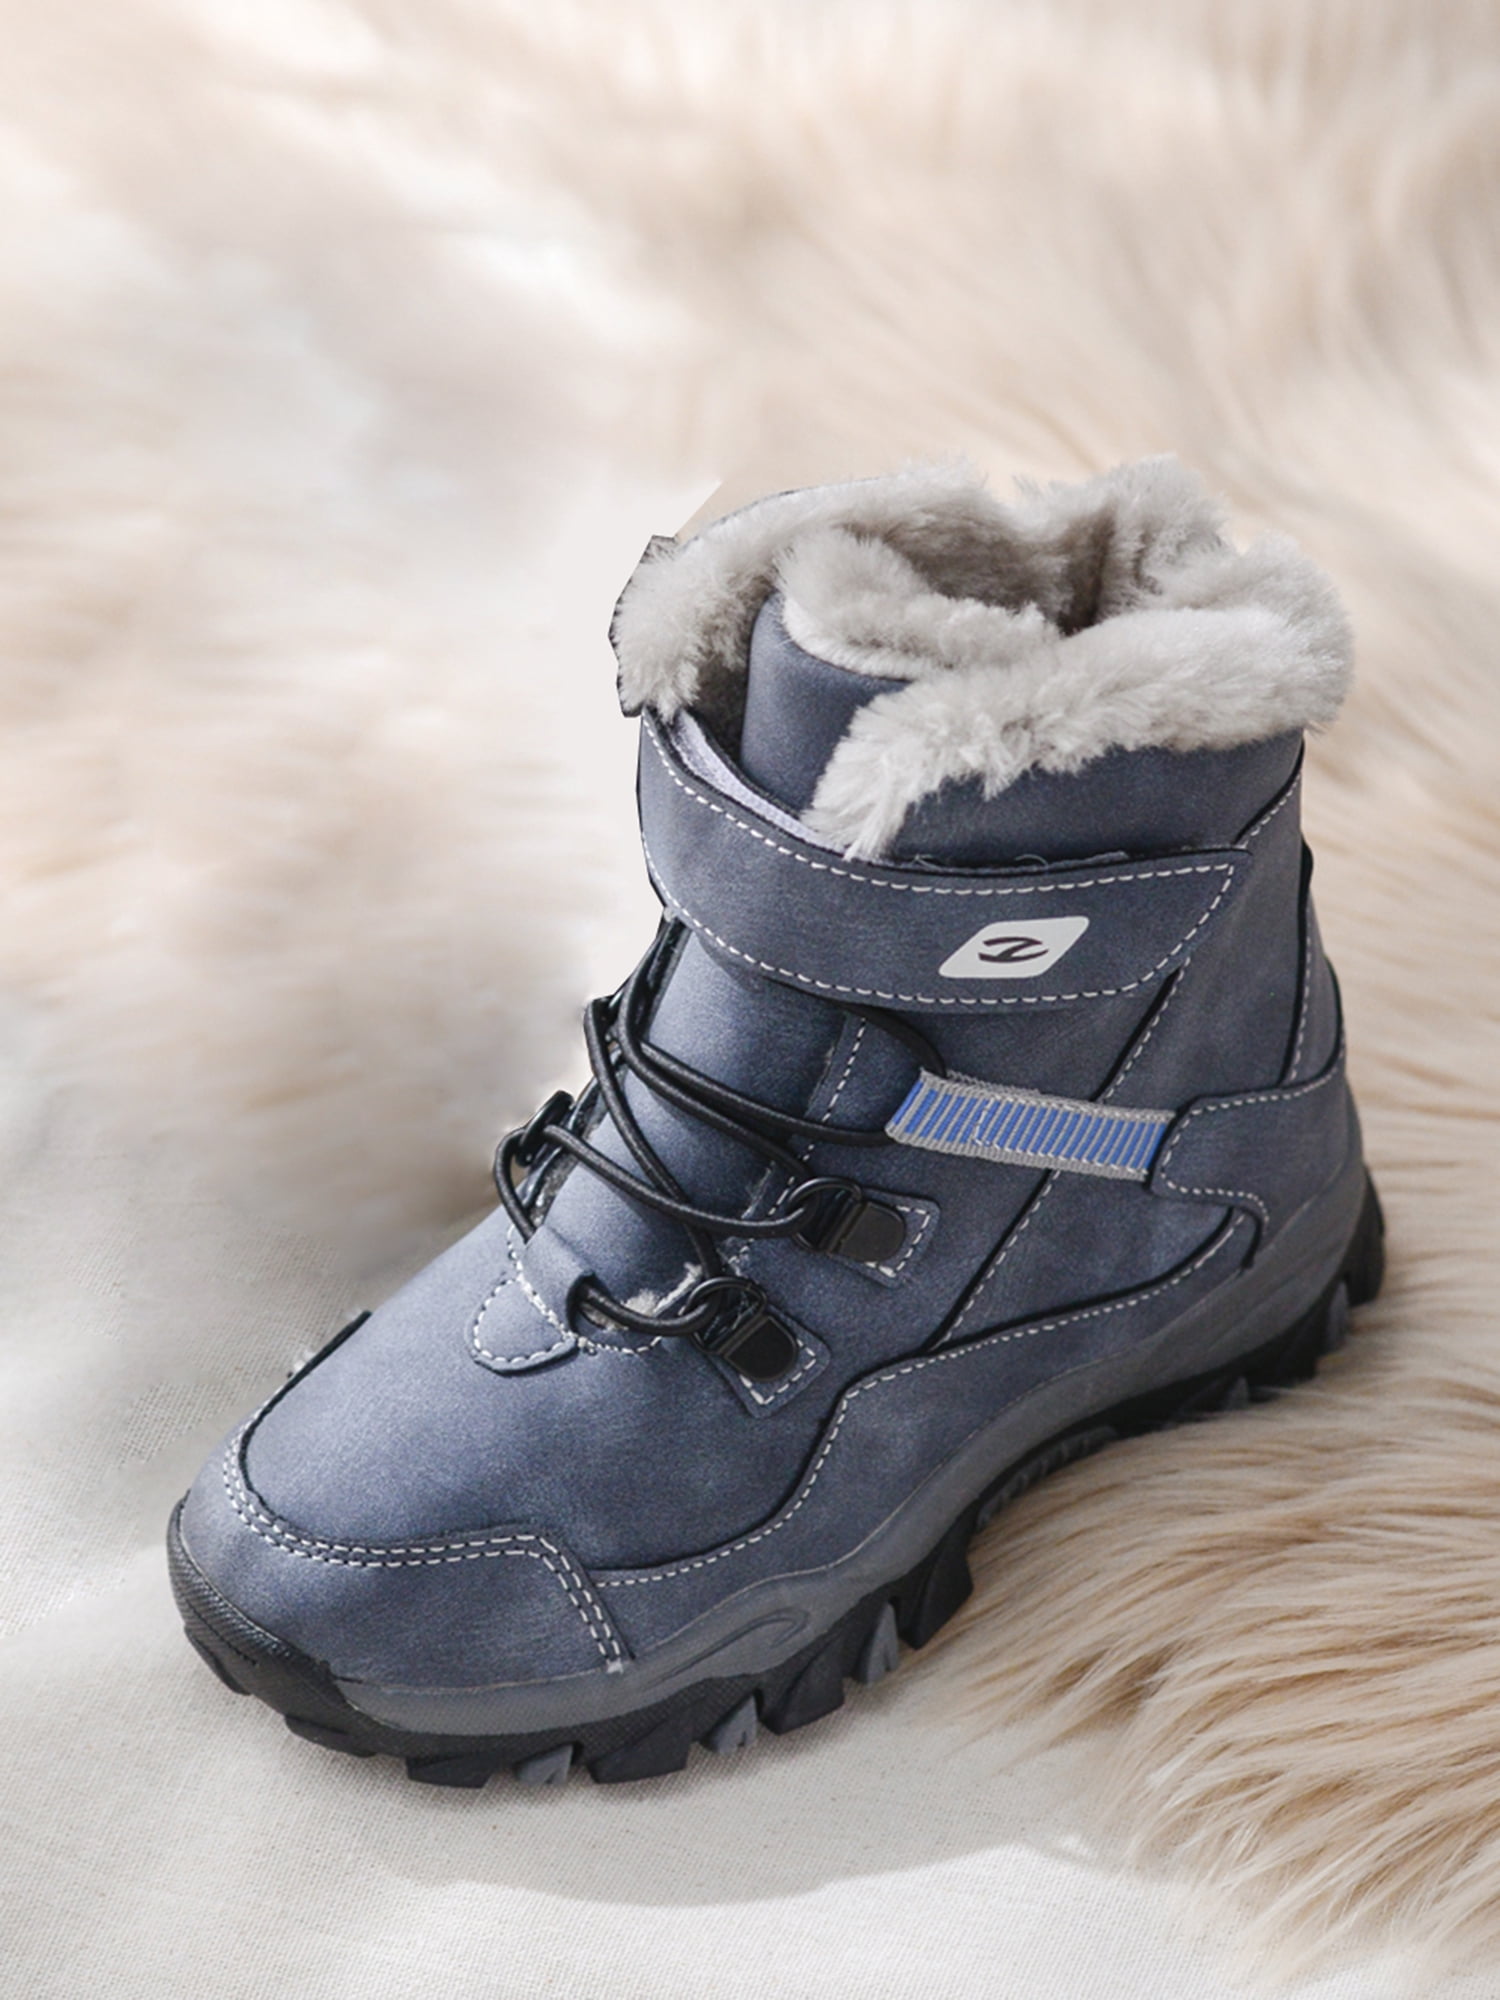 Toddler//Little Kid//Big Kid Kids Boots Boys Snow Boots Girls Winter Boots Waterproof Lightweight Fur Lined Side Zipper Ankle Boots Baby Winter Shoes Walking Boots